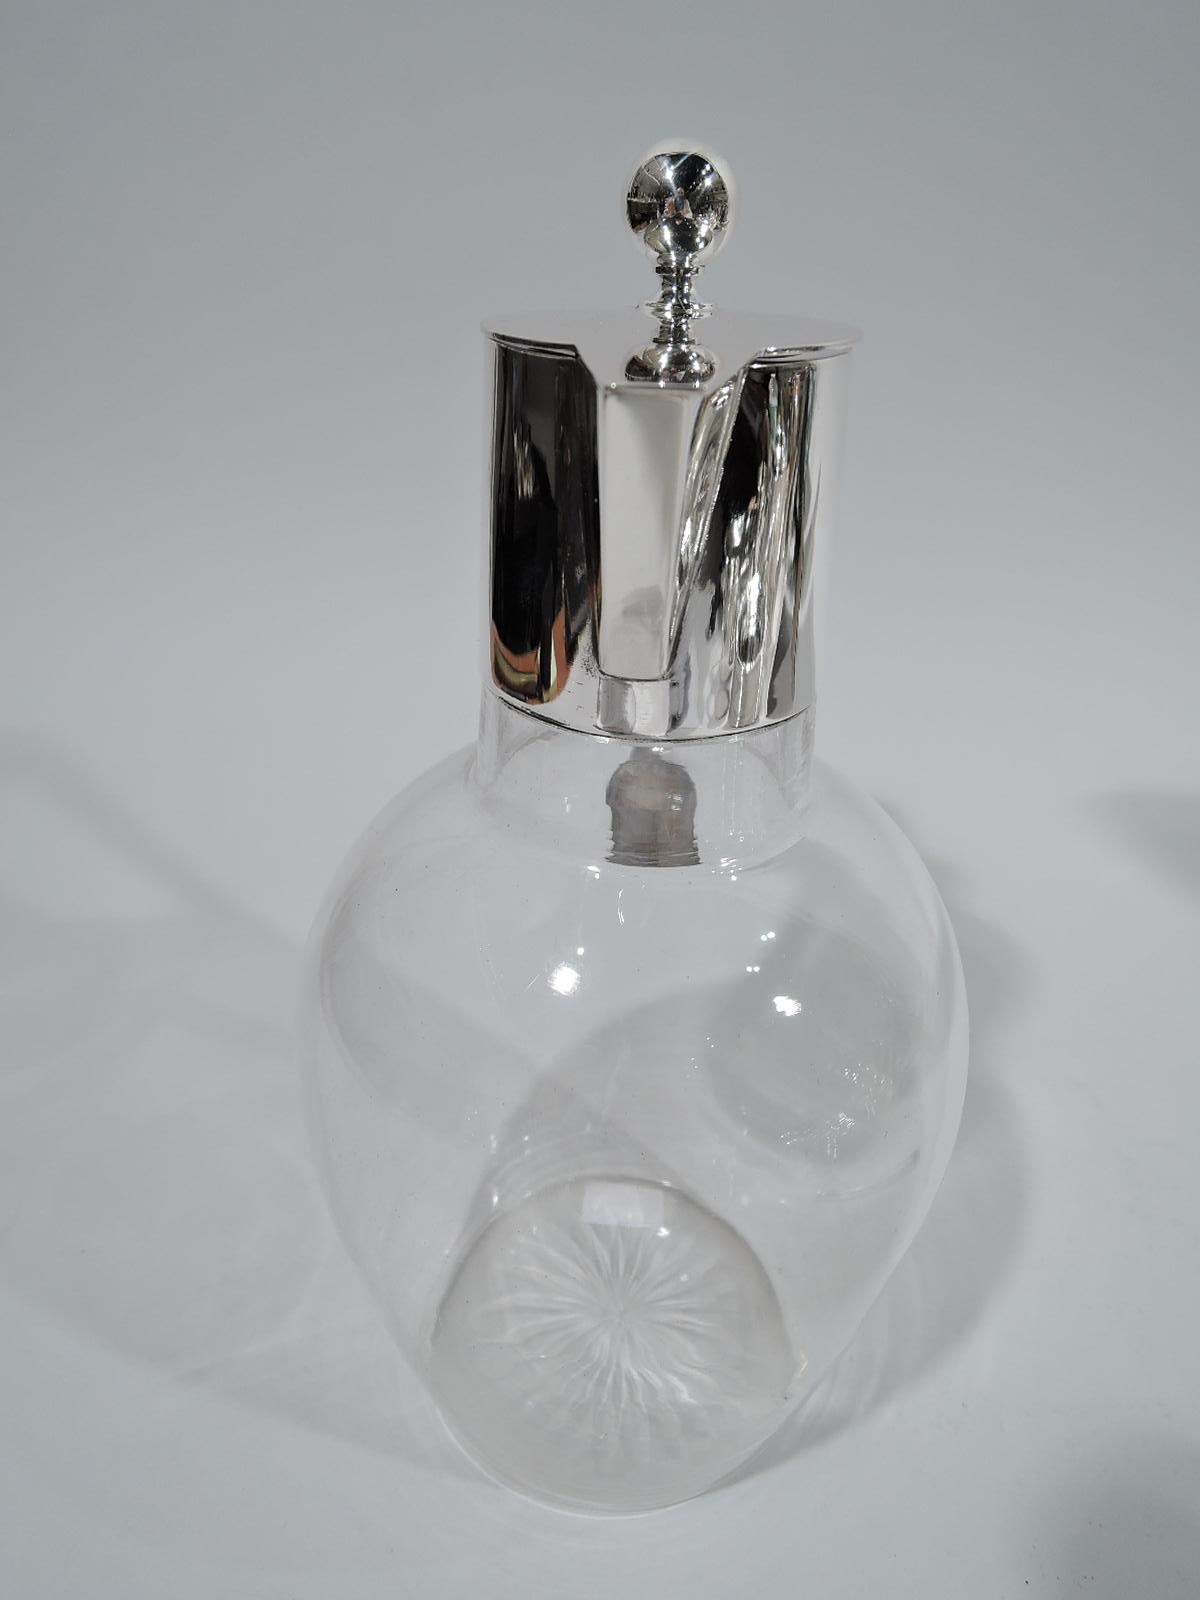 German Modern 800 silver and glass decanter, ca 1910. Ovoid glass body with star cut to underside. Drum-form neck and triangular spout. Cover flat and hinged with ball finial. Bracket handle. Silver fully marked including Koch & Bergfeld maker’s